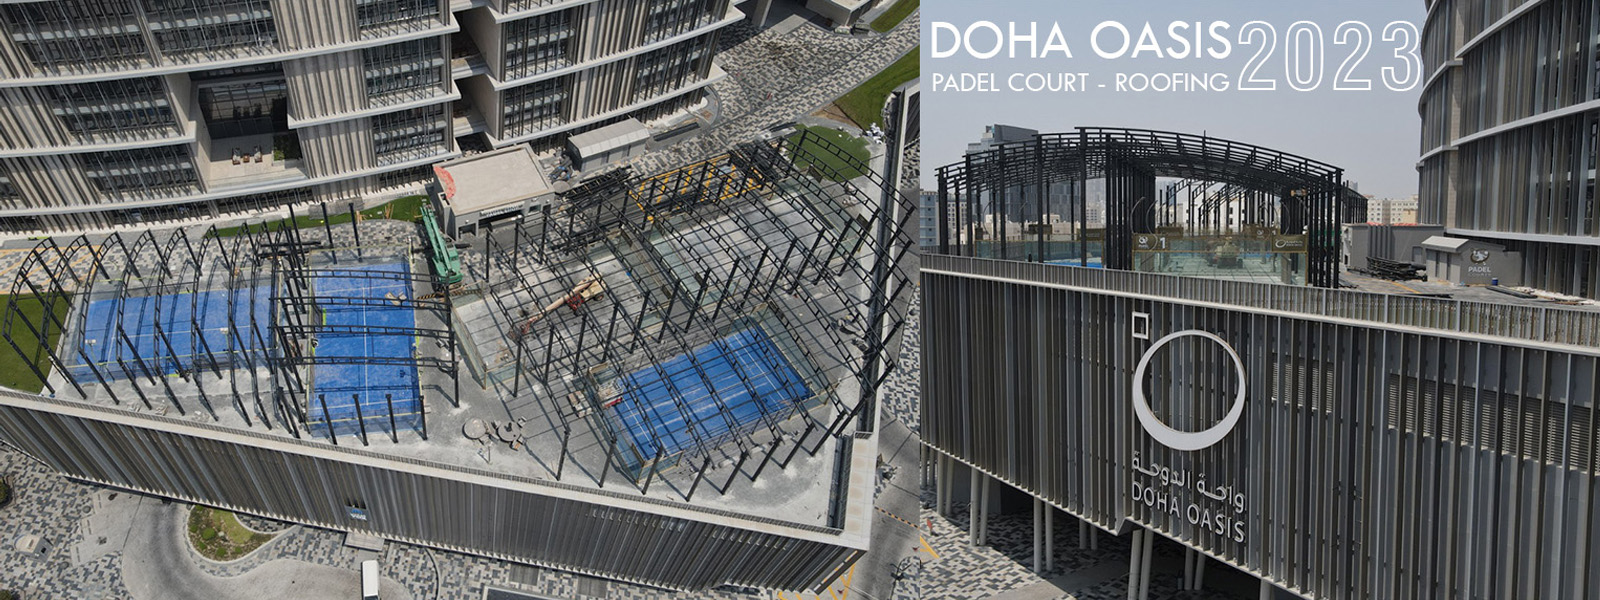 DOHA OASIS PADEL ROOF COVERING